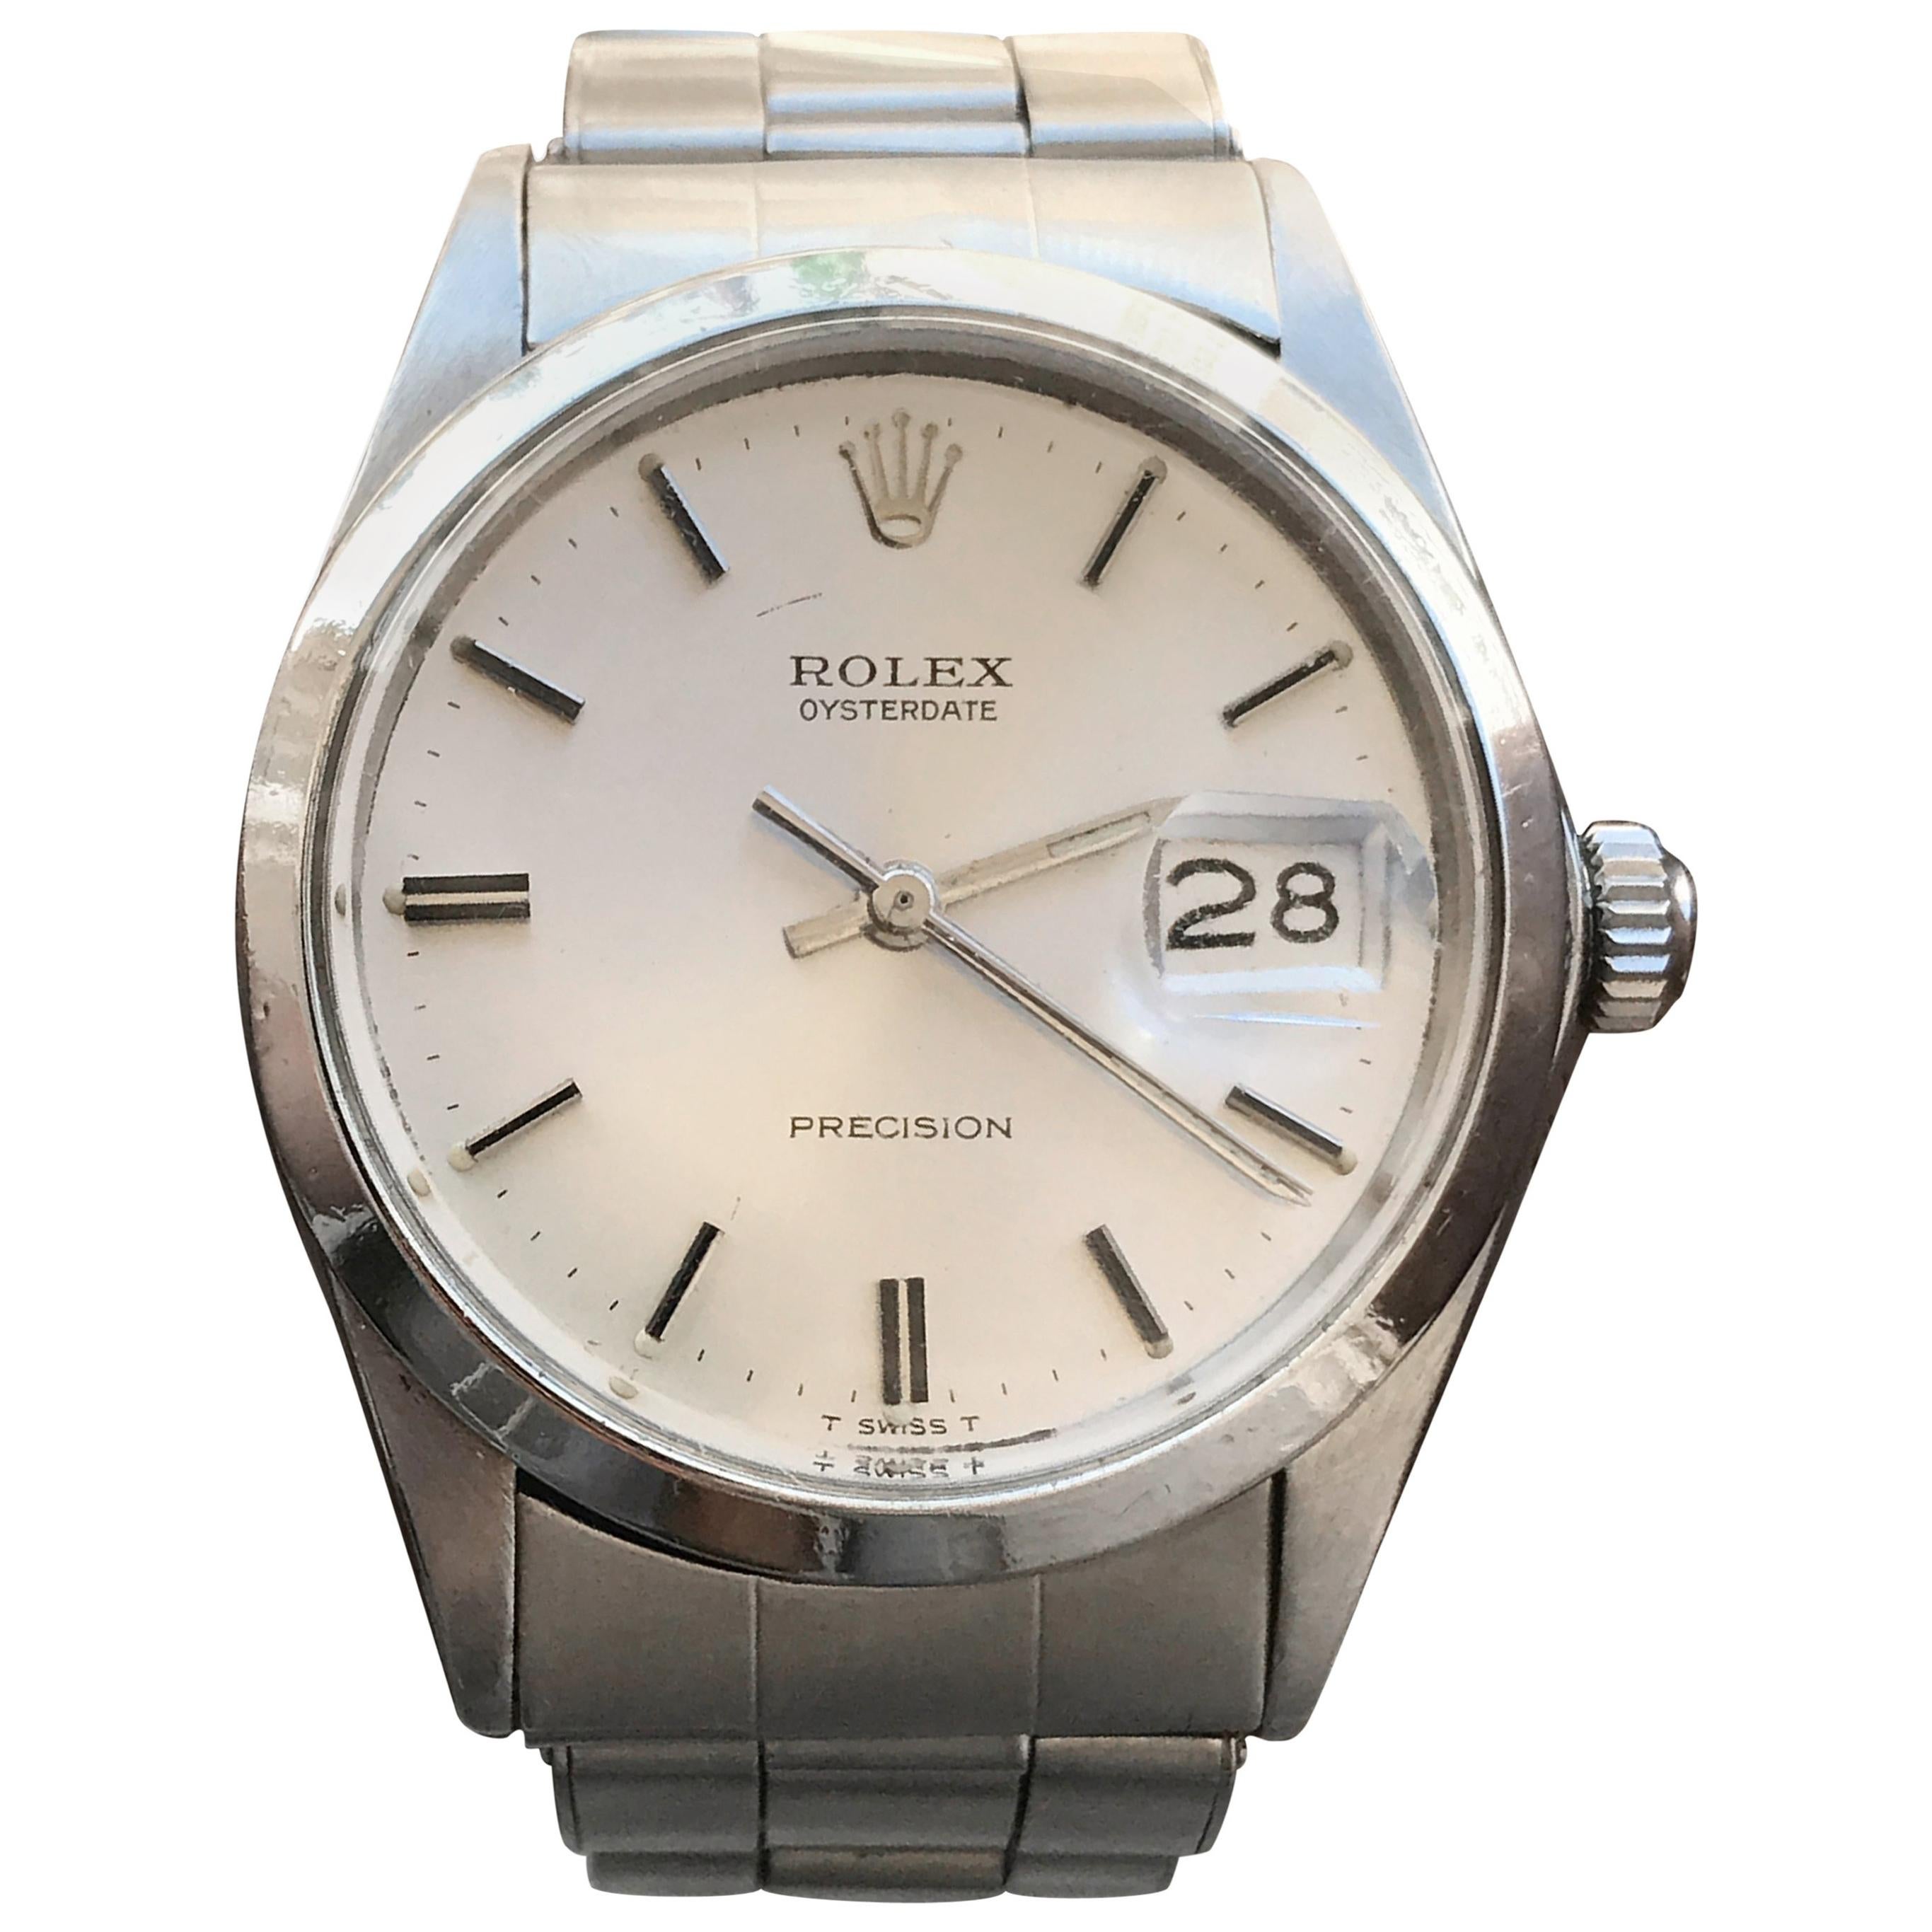 Rolex Oysterdate Precision 6694 Swiss Made 1960s Rivet Band Men's Watch For Sale